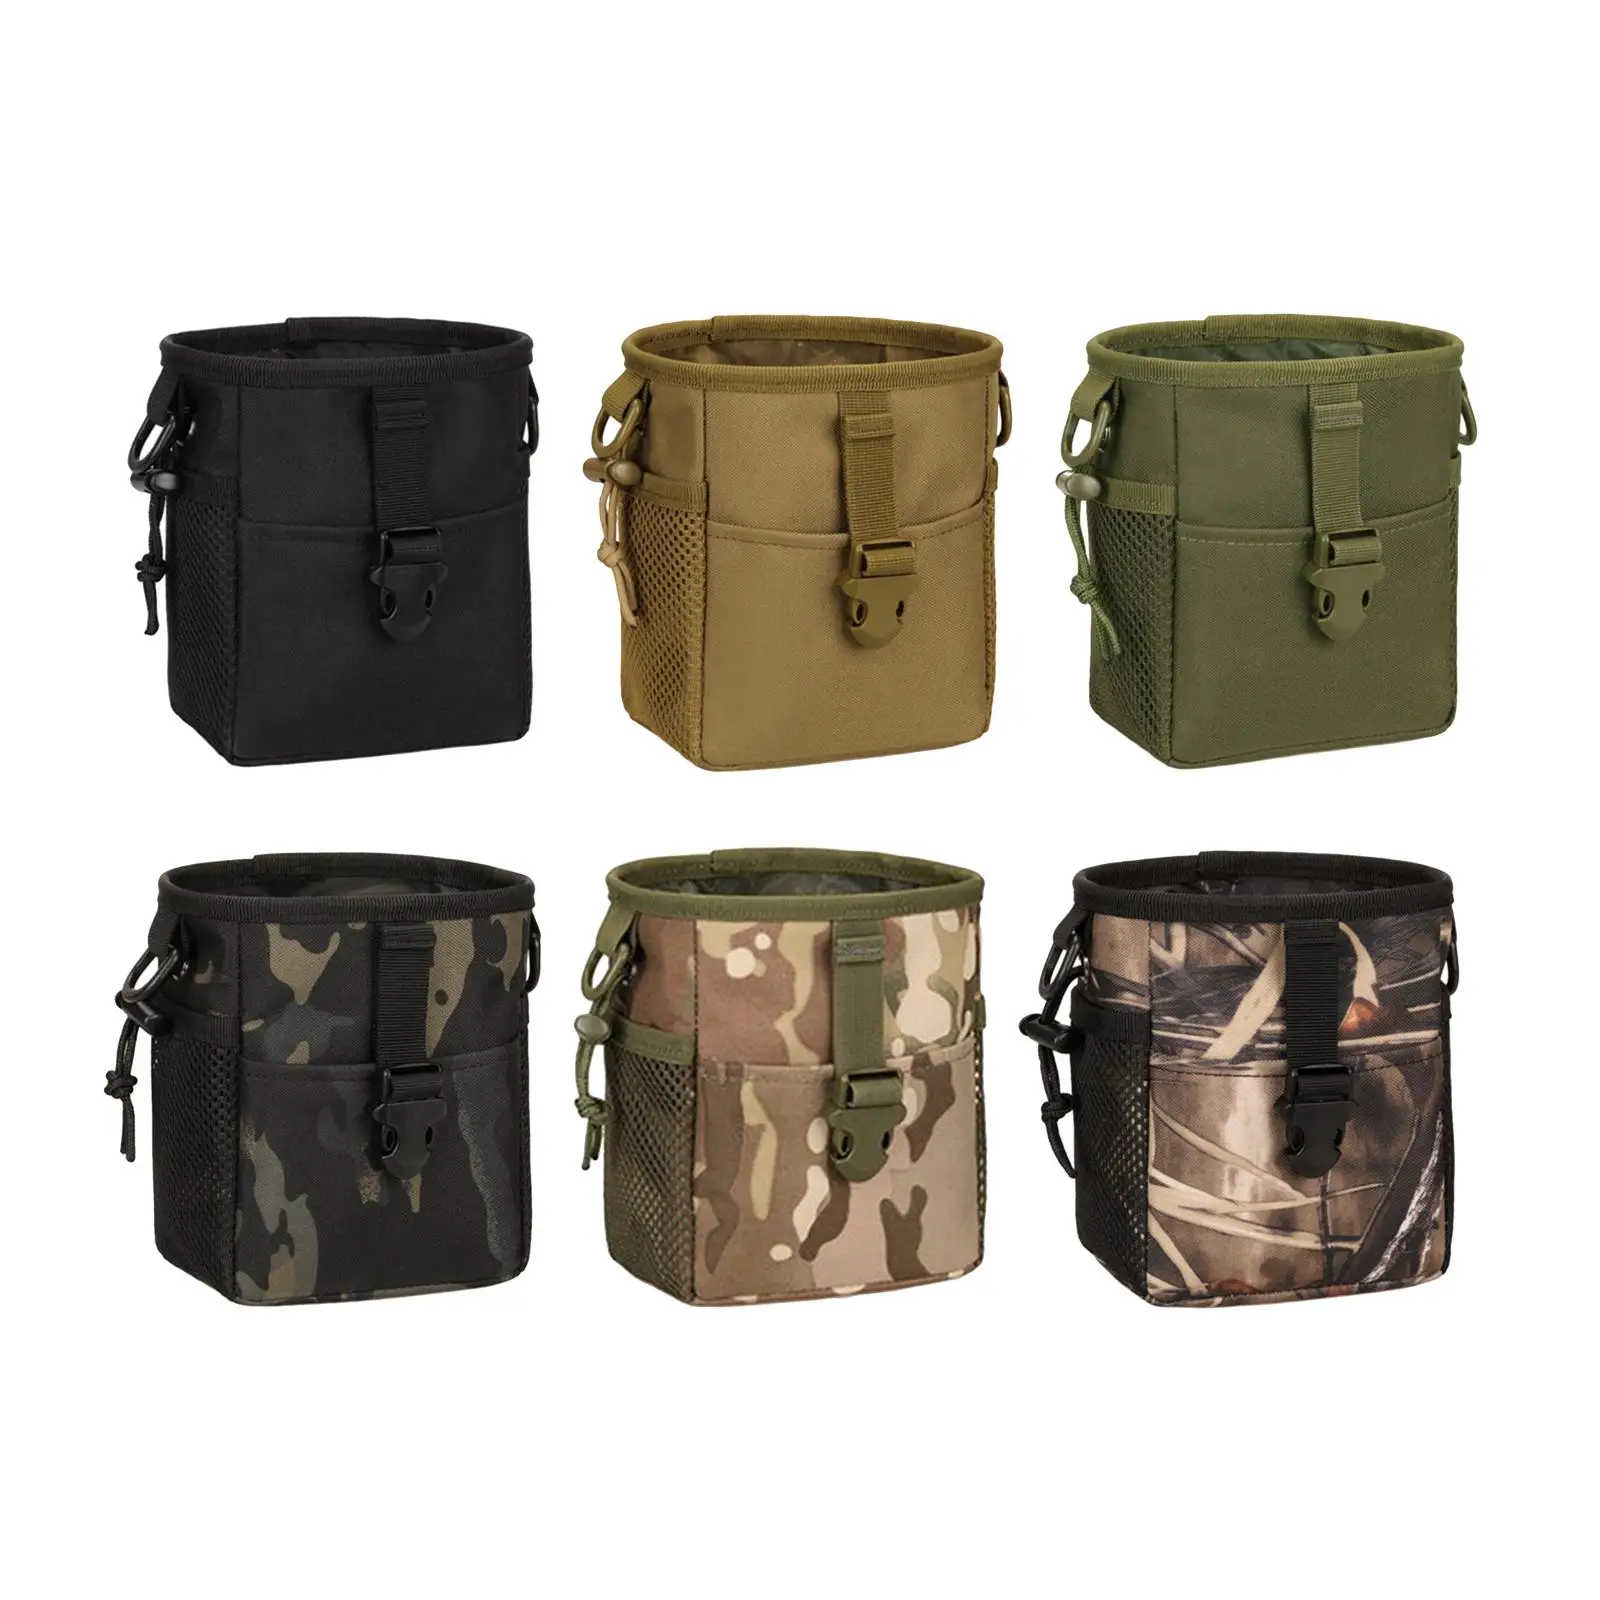 Pouch Bag Multifunction Attachments Accessories Durable Belt Bag for Gear Hiking